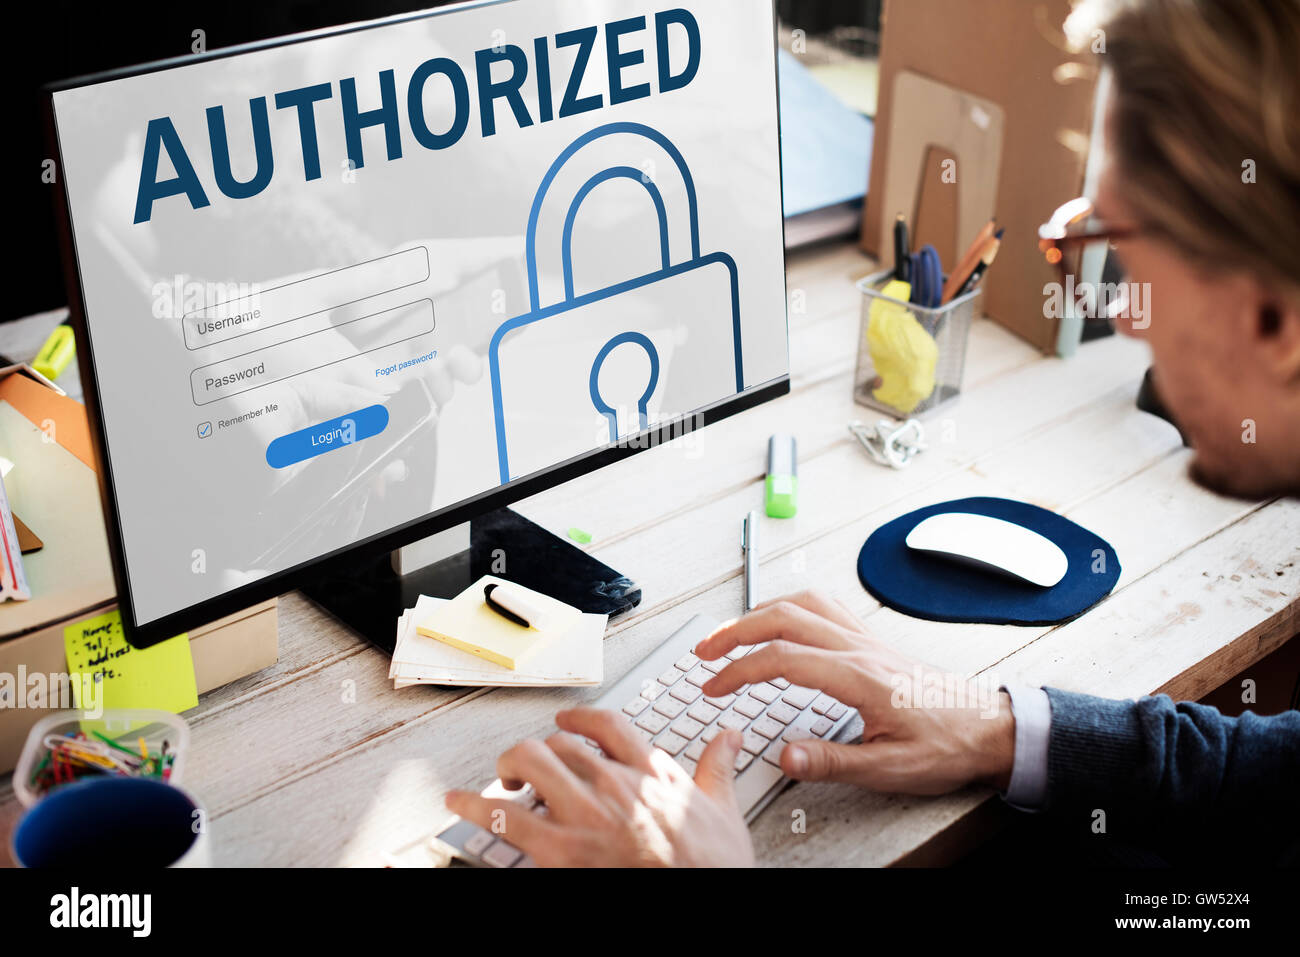 Authorized Accessibility Network Security System Concept Stock Photo